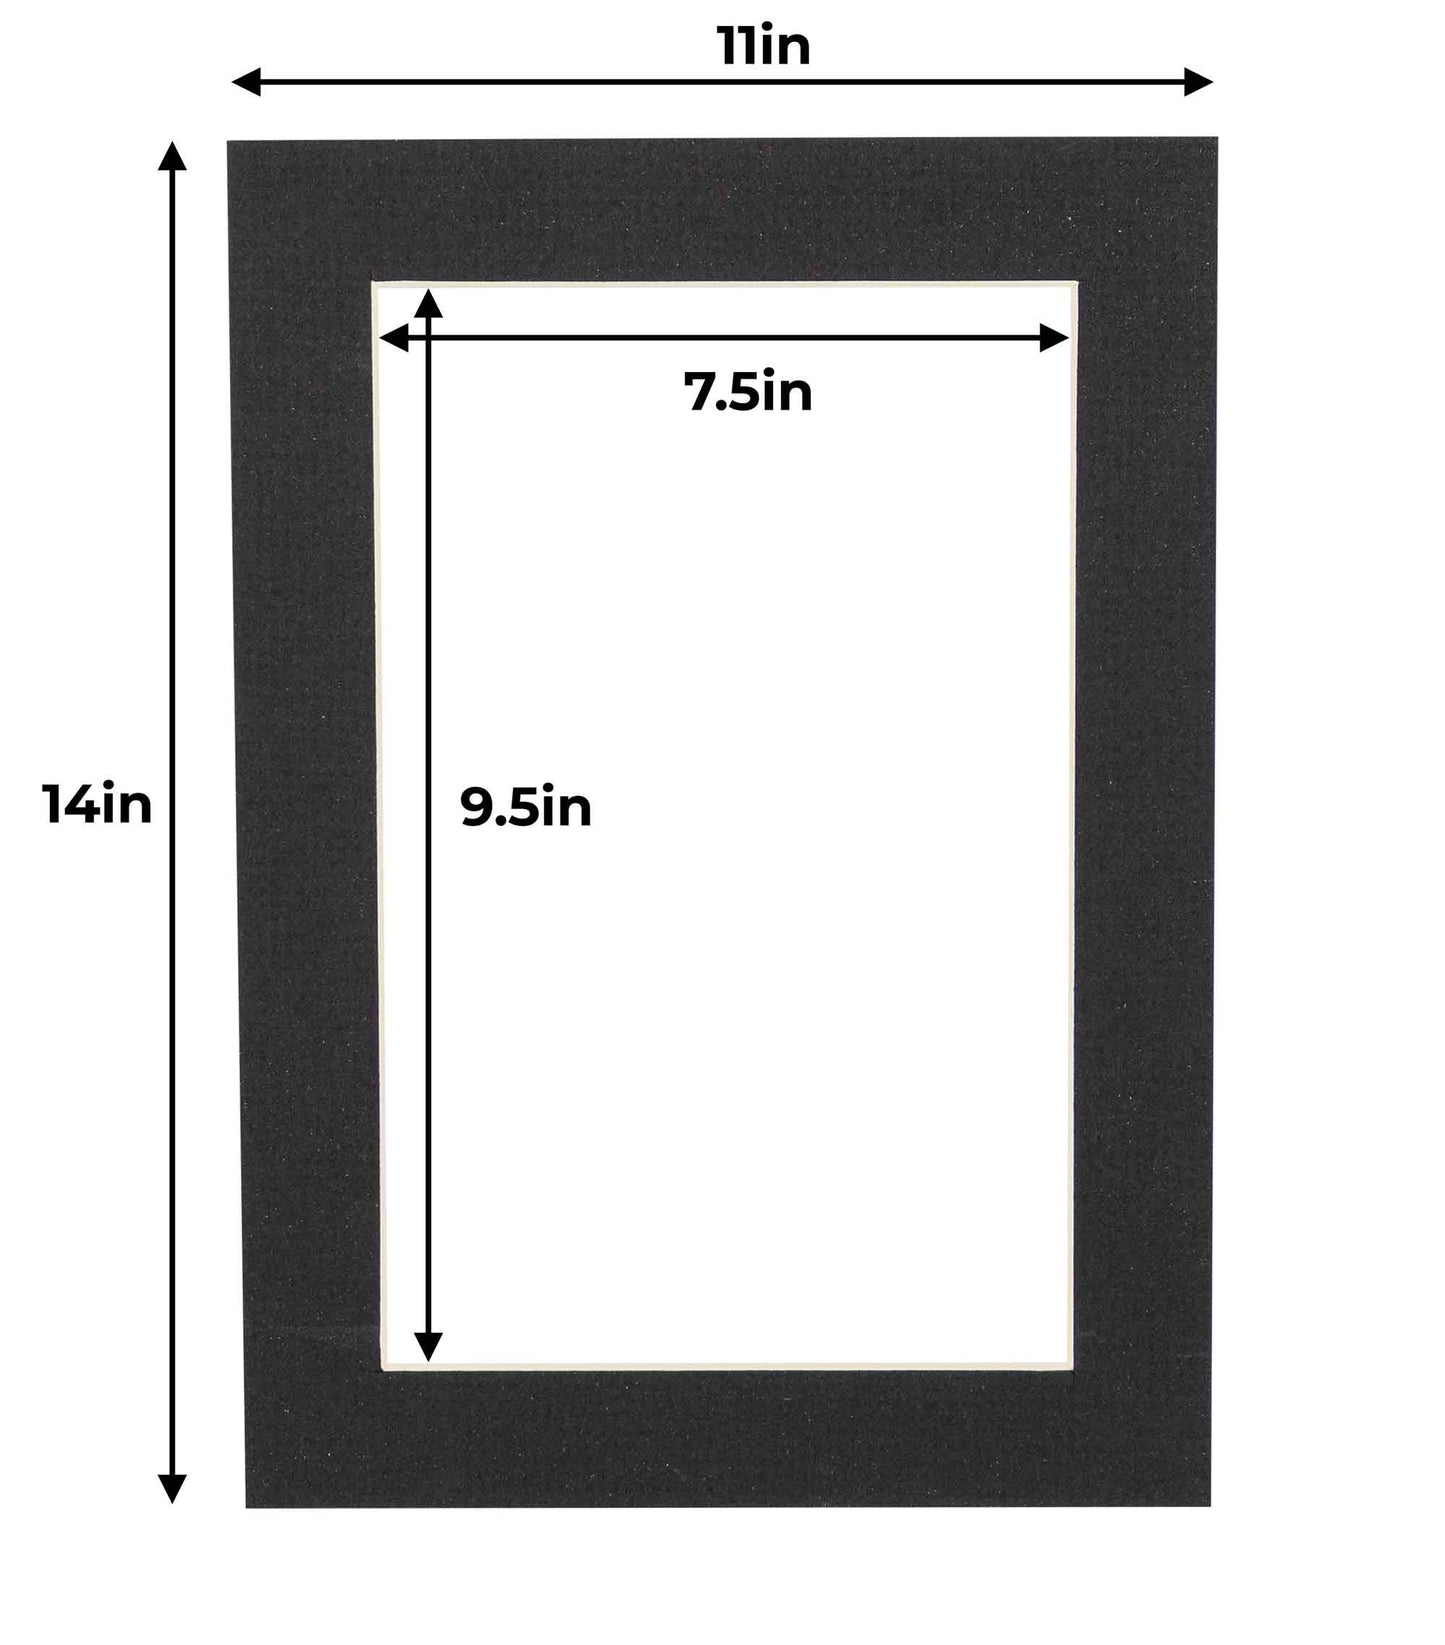 Pack of 10 Textured Black Precut Acid-Free Matboard Set with Clear Bags & Backings